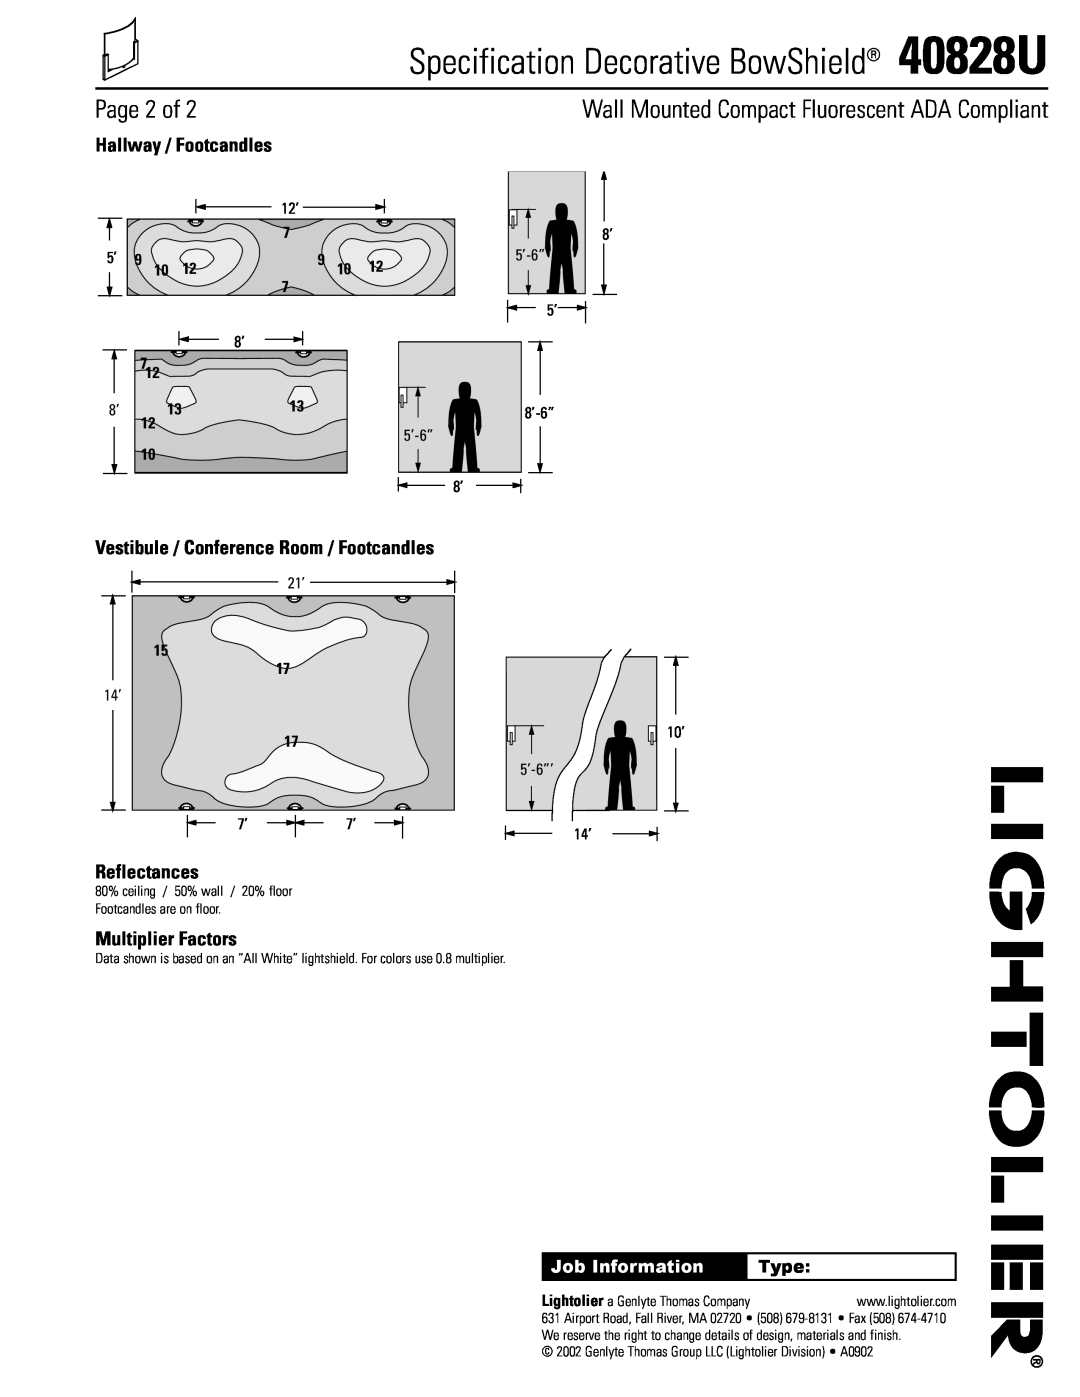 Lightolier Page 2 of, Specification Decorative BowShield 40828U, Wall Mounted Compact Fluorescent ADA Compliant, Type 